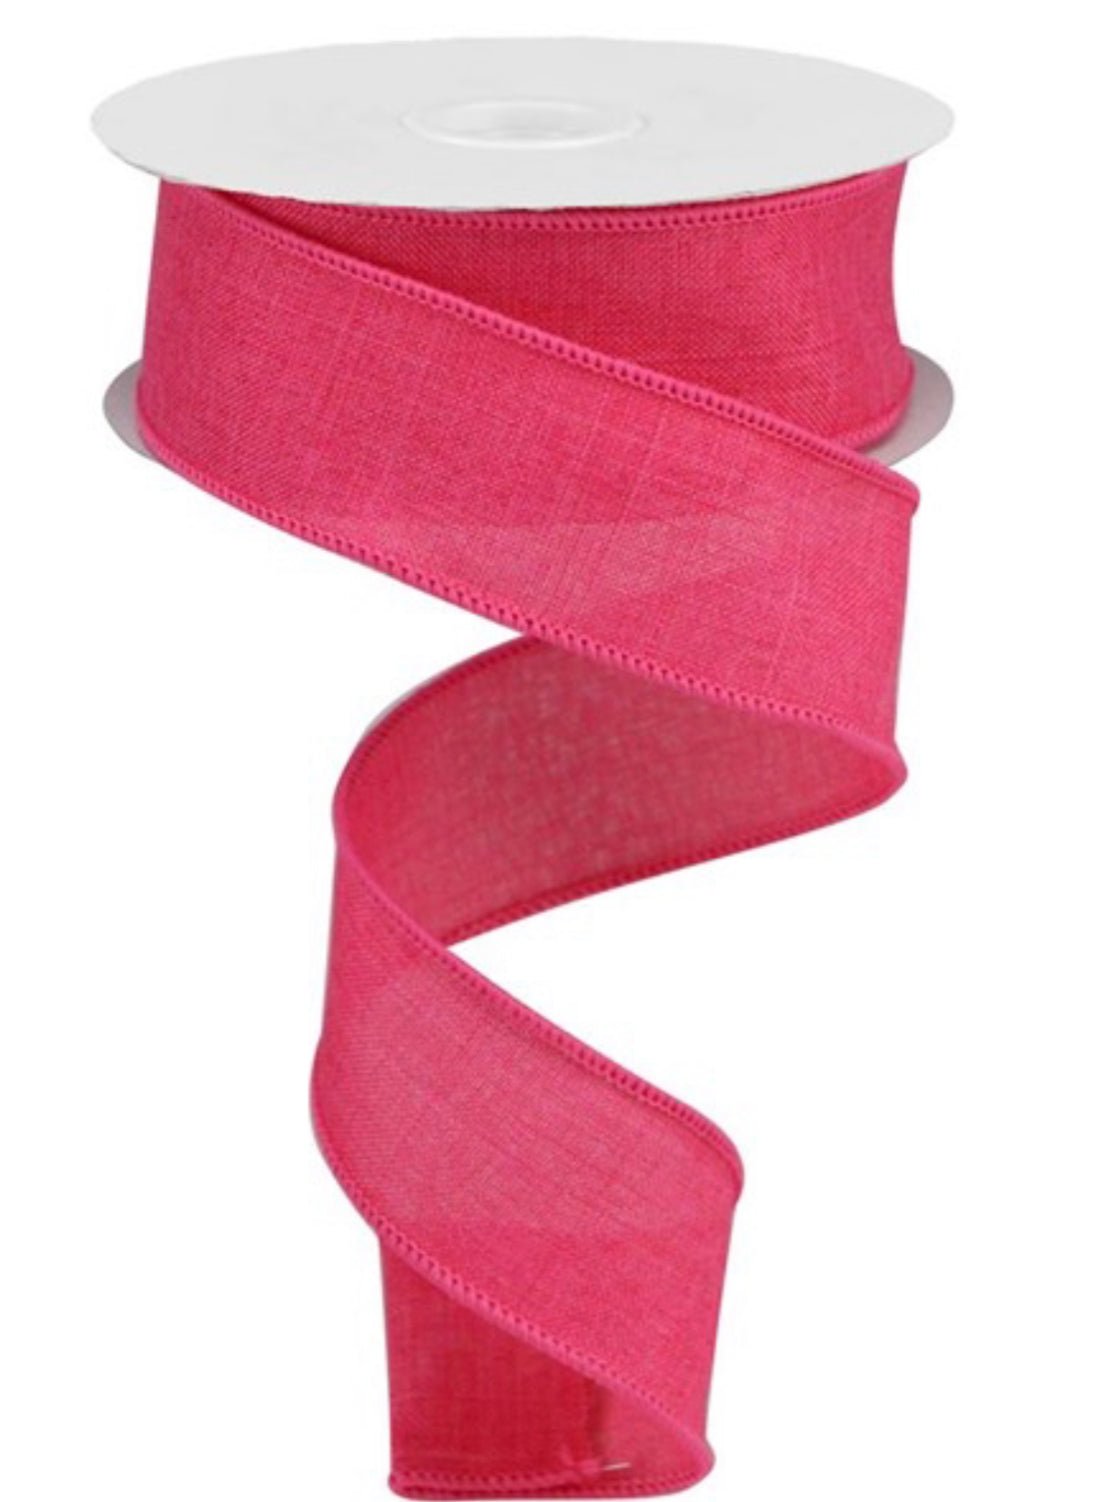 Hot pink Solid wired ribbon 1.5” - Greenery MarketWired ribbonRG127811